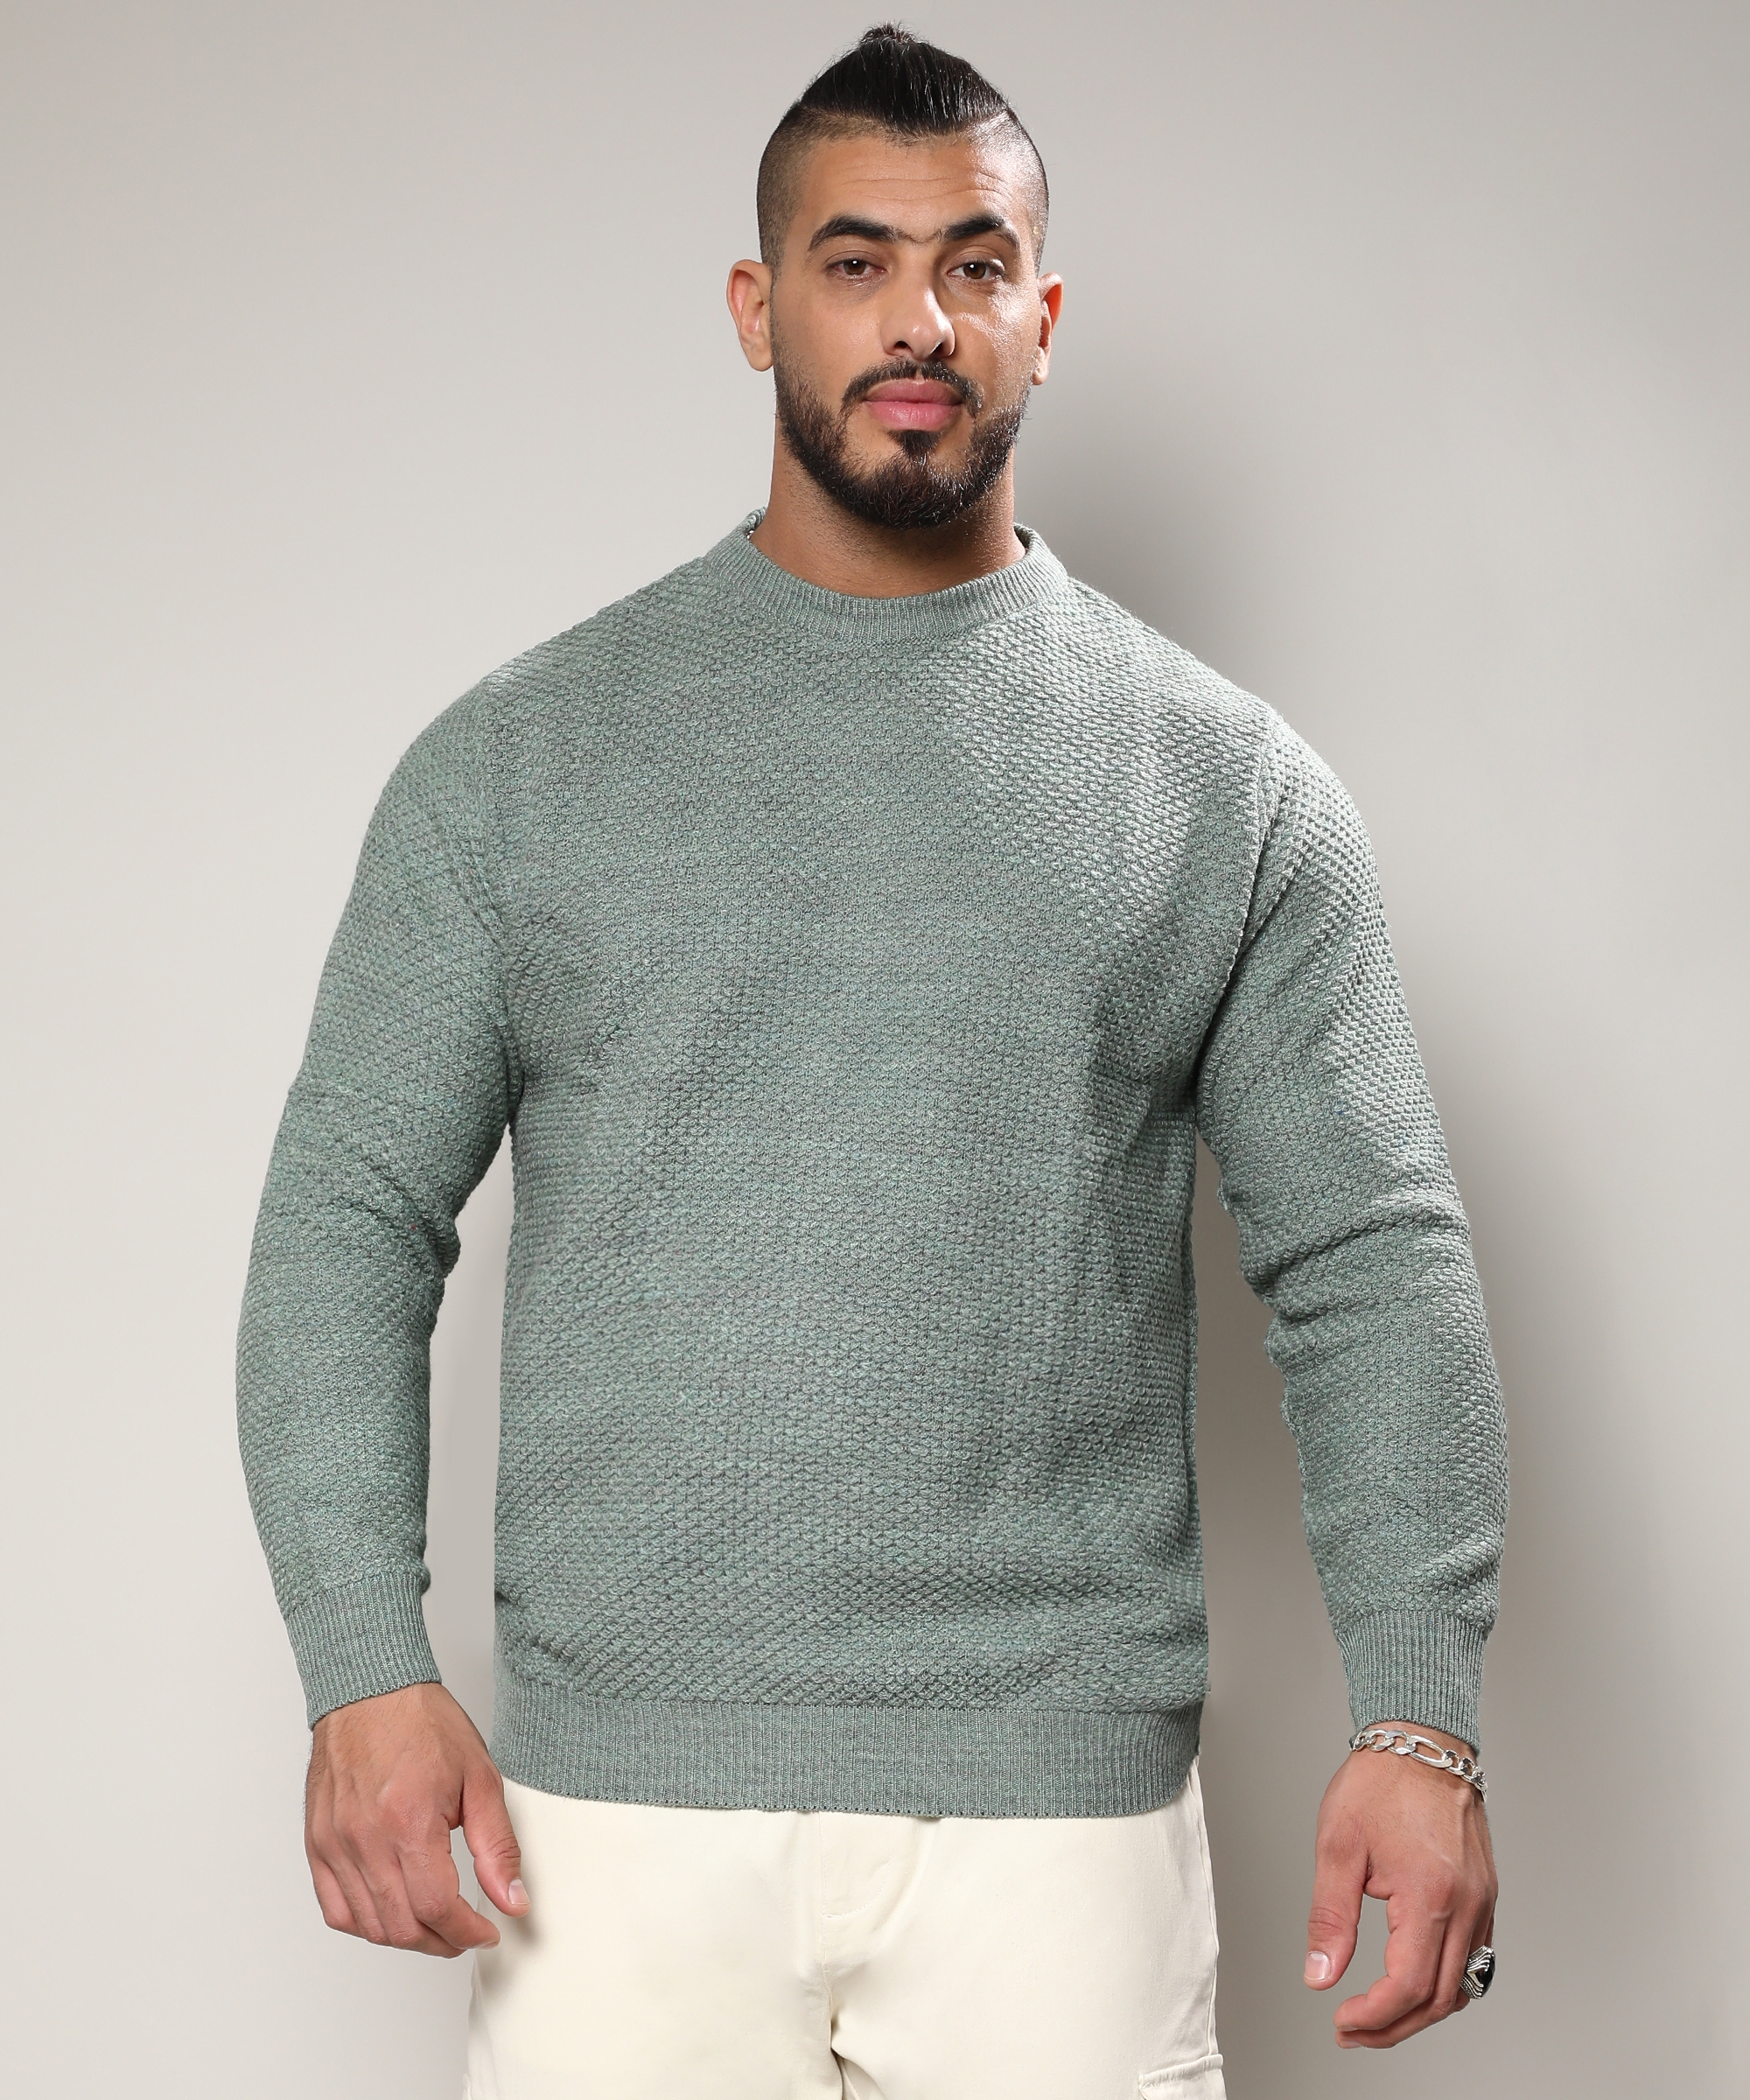 Instafab Plus | Men's Olive Green Textured Knit Pullover Sweater